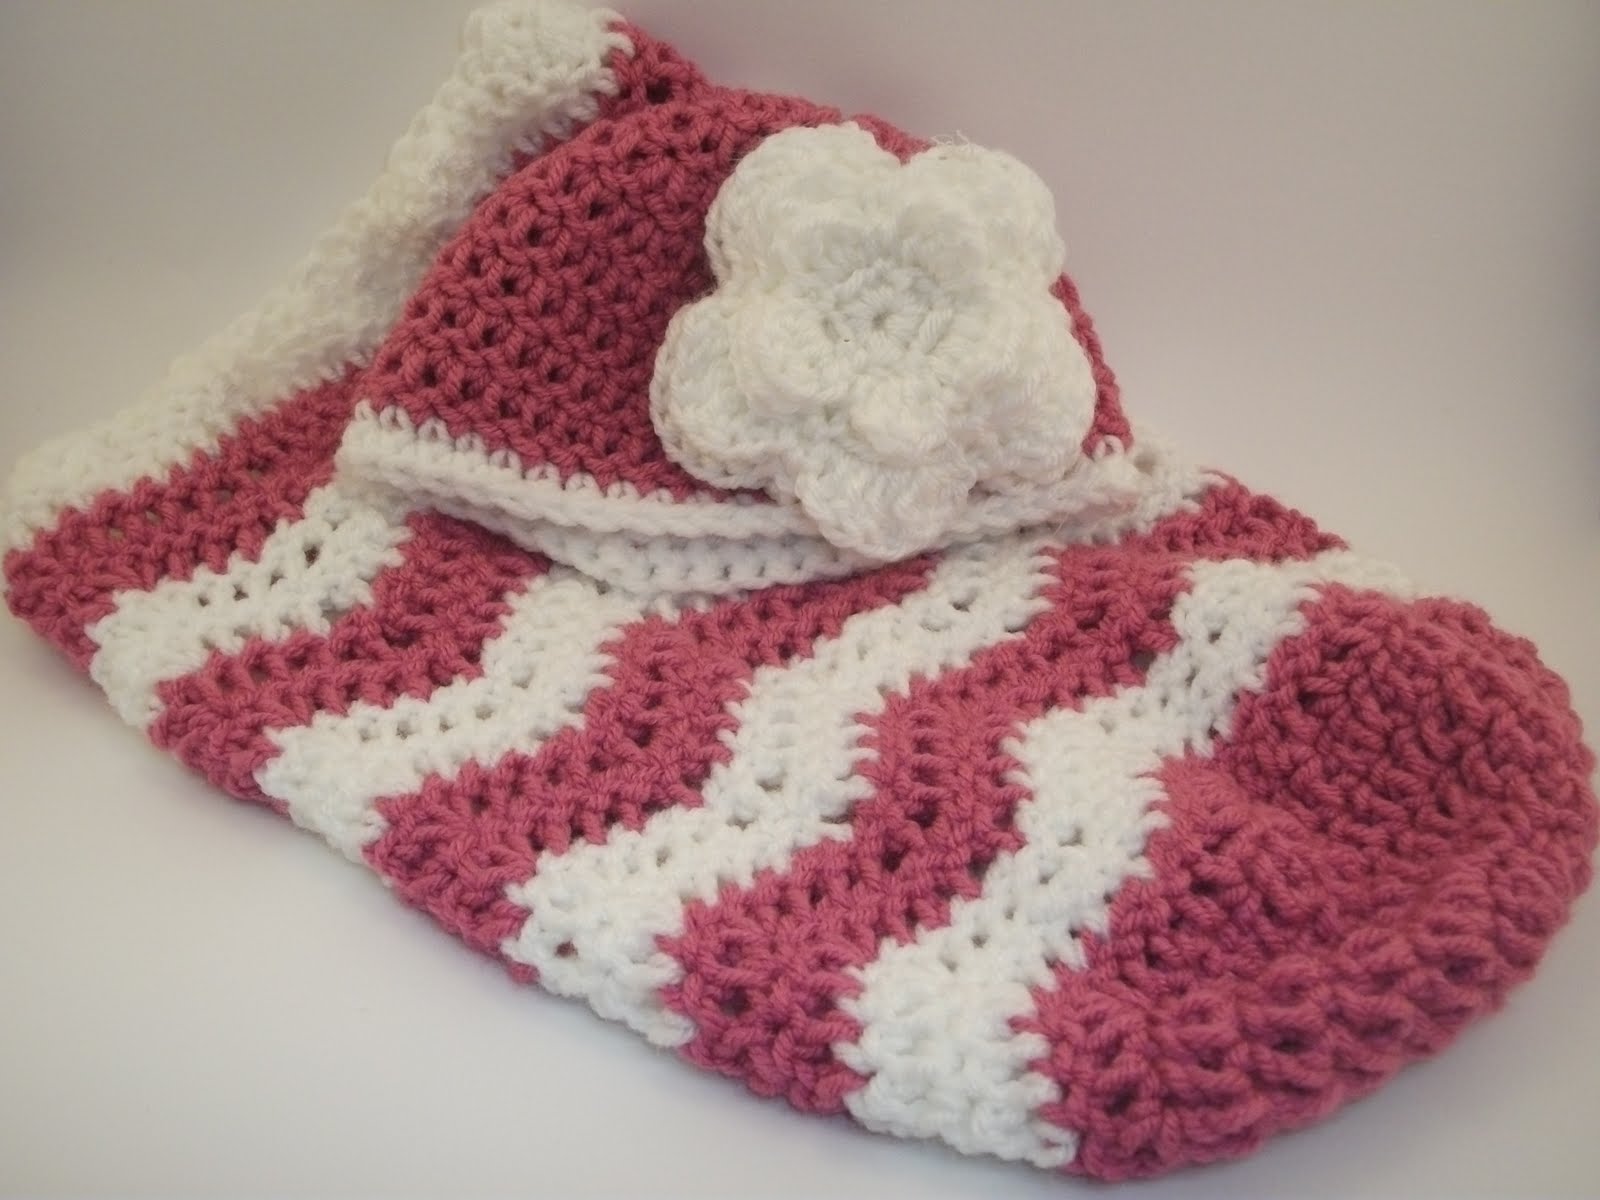 Cuddle Cocoons - Crochet Baby Cocoon Patterns